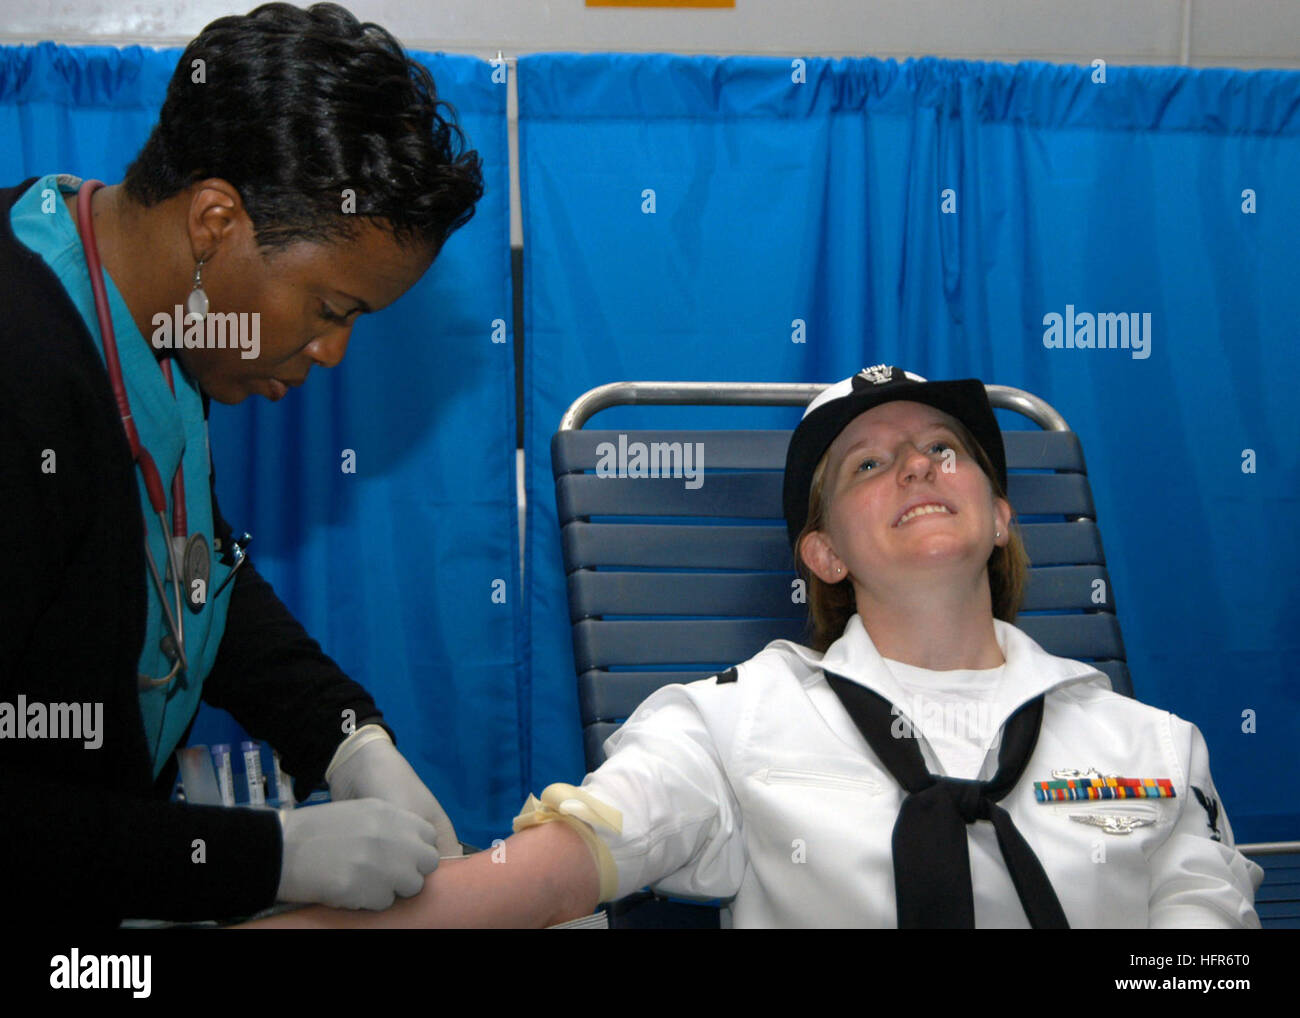 060526-N-7292N-005 New York City (May 26th, 2006) - In the hangar bay aboard the amphibious assault ship USS Kearsarge (LHD 3), a New York City blood center worker, Michelle Simon-Francis carefully retracts a needle from blood donor Personnel Specialist 3rd Class Deanna Hoopes. The blood drive is one of several community-relations projects, which Kearsarge and her crew are participating in during Fleet Week 2006. U.S. Navy photo by Mass Communications Specialist Christen Nicholas (RELEASED) US Navy 060526-N-7292N-005 In the hangar bay aboard the amphibious assault ship USS Kearsarge (LHD 3), a Stock Photo